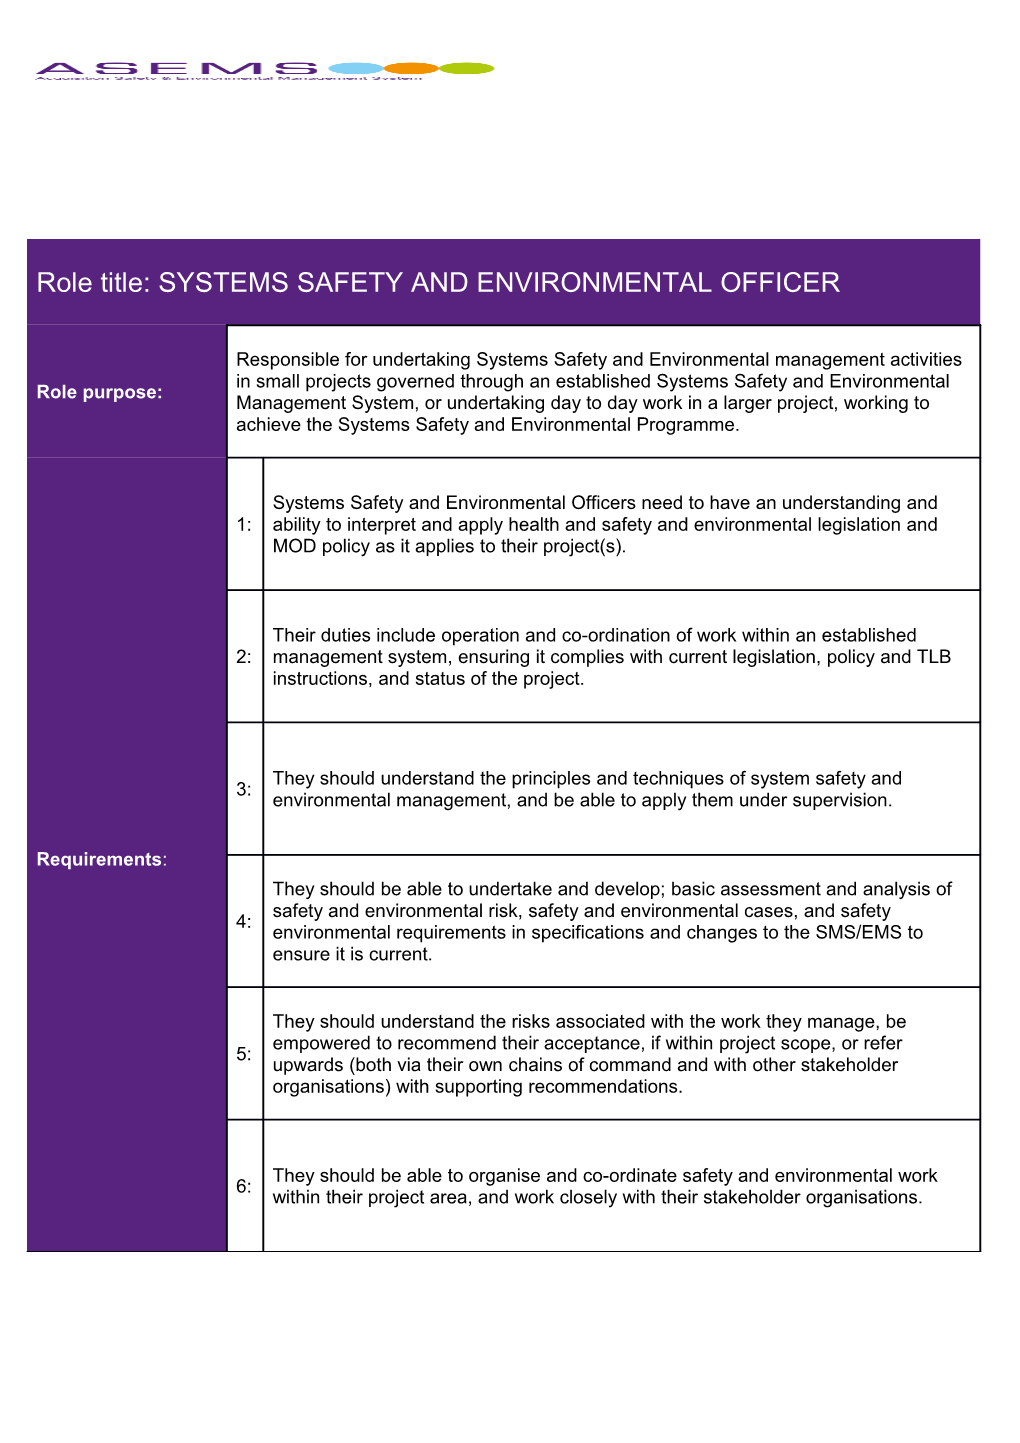 Complies with the Principles of System Safety Management